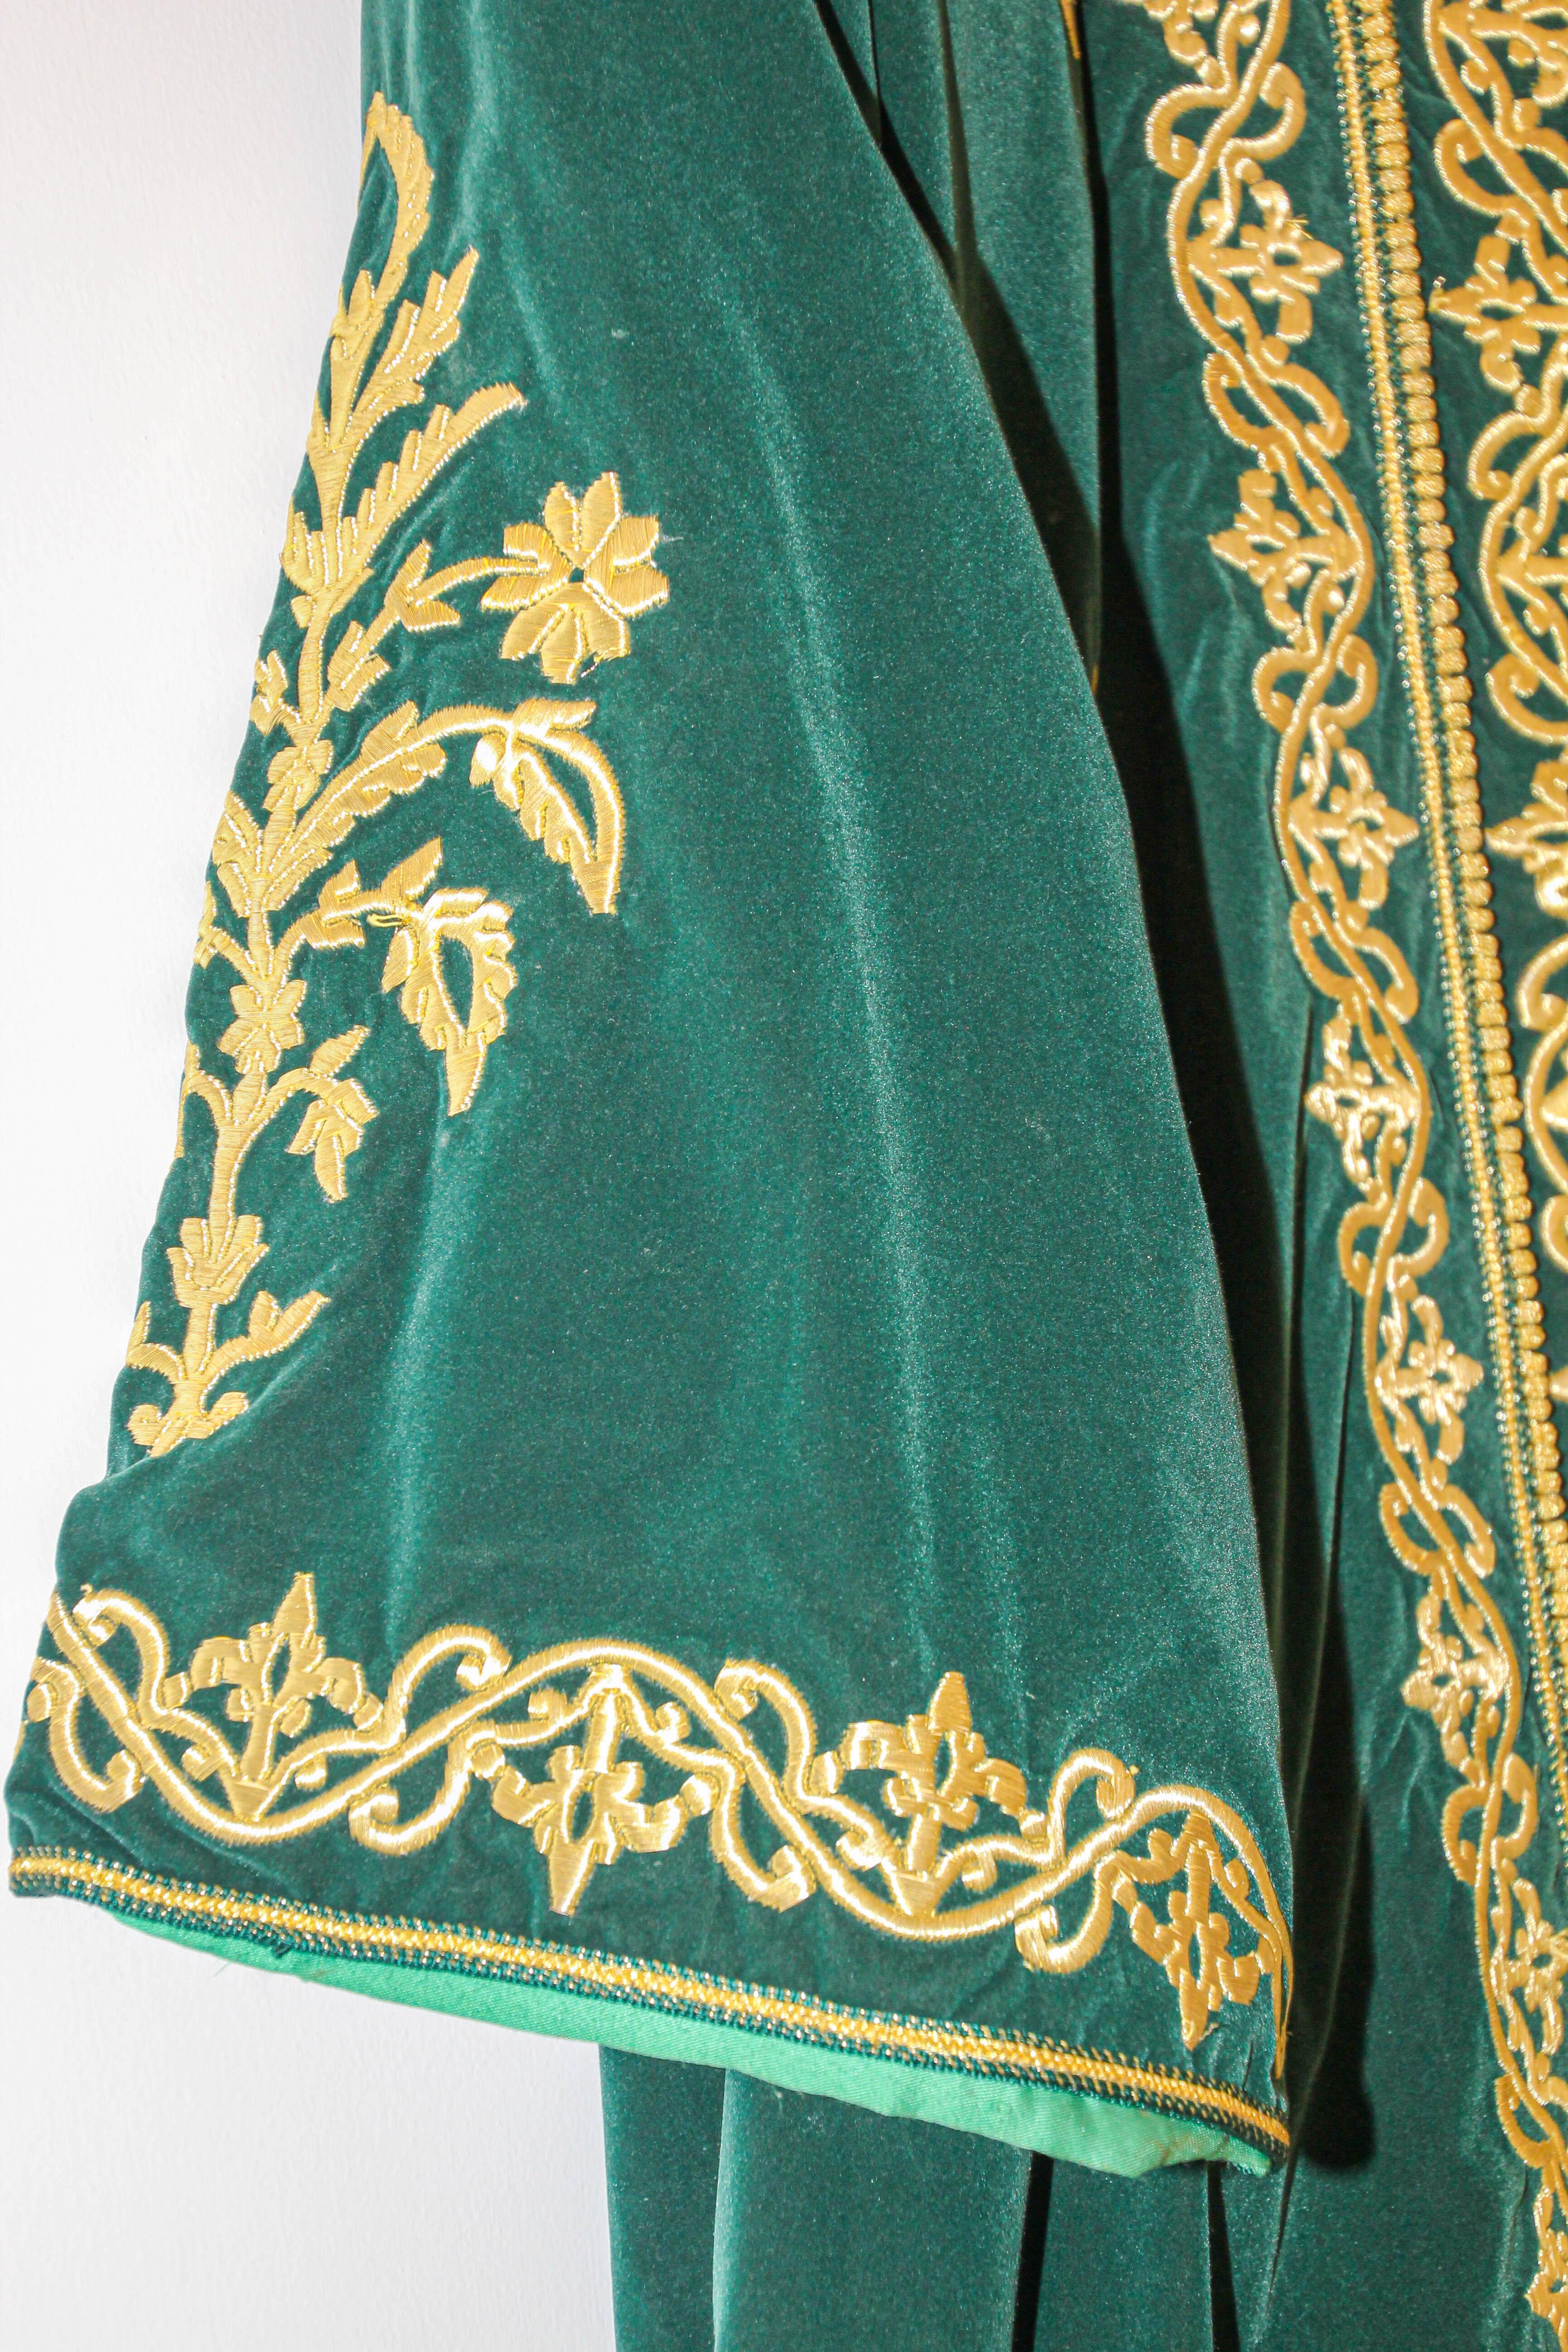 1960s Vintage Moroccan Velvet Caftan Emerald Green and Gold Thread For Sale 9